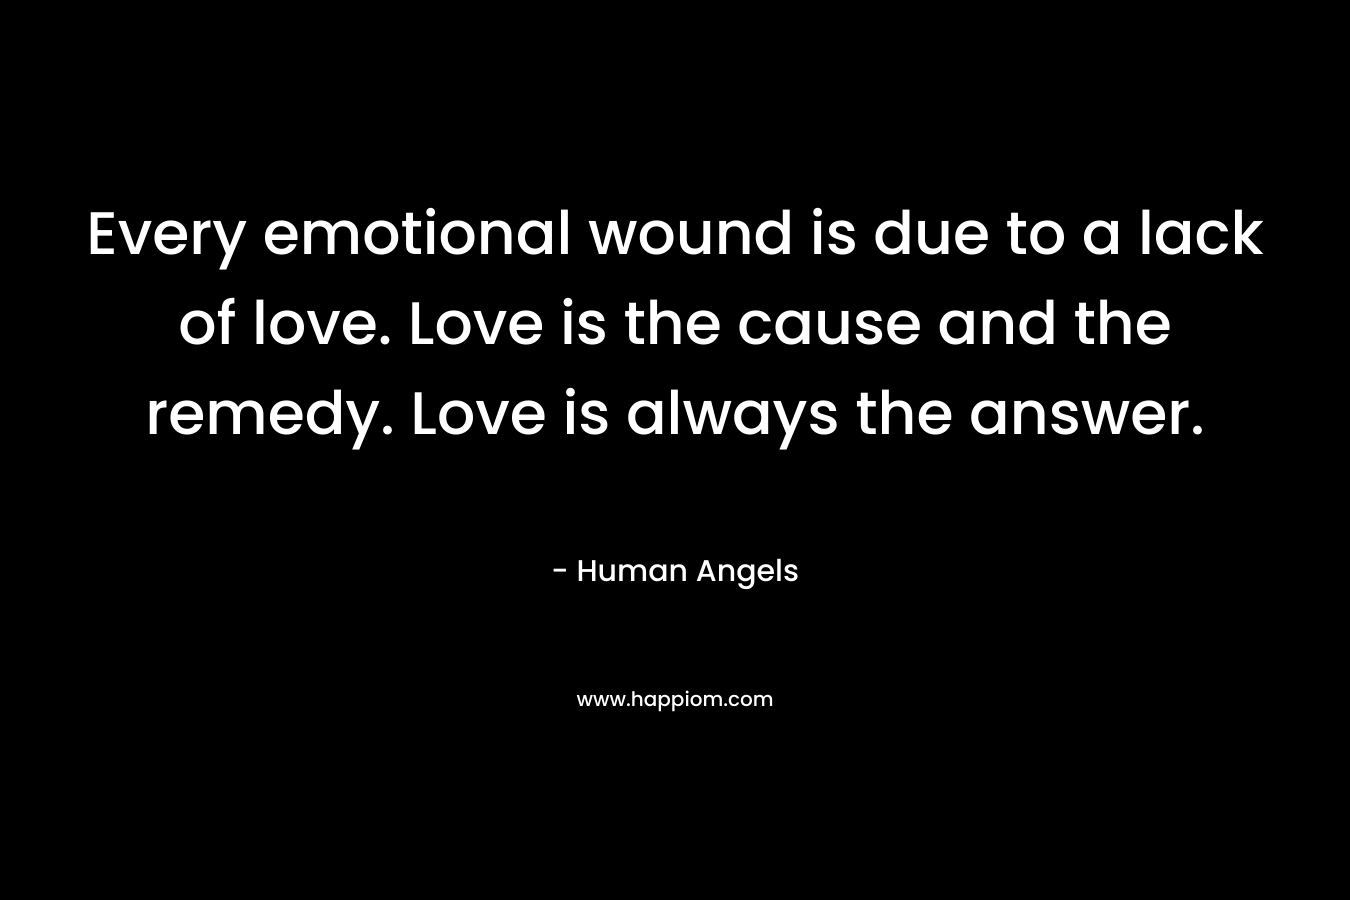 Every emotional wound is due to a lack of love. Love is the cause and the remedy. Love is always the answer.